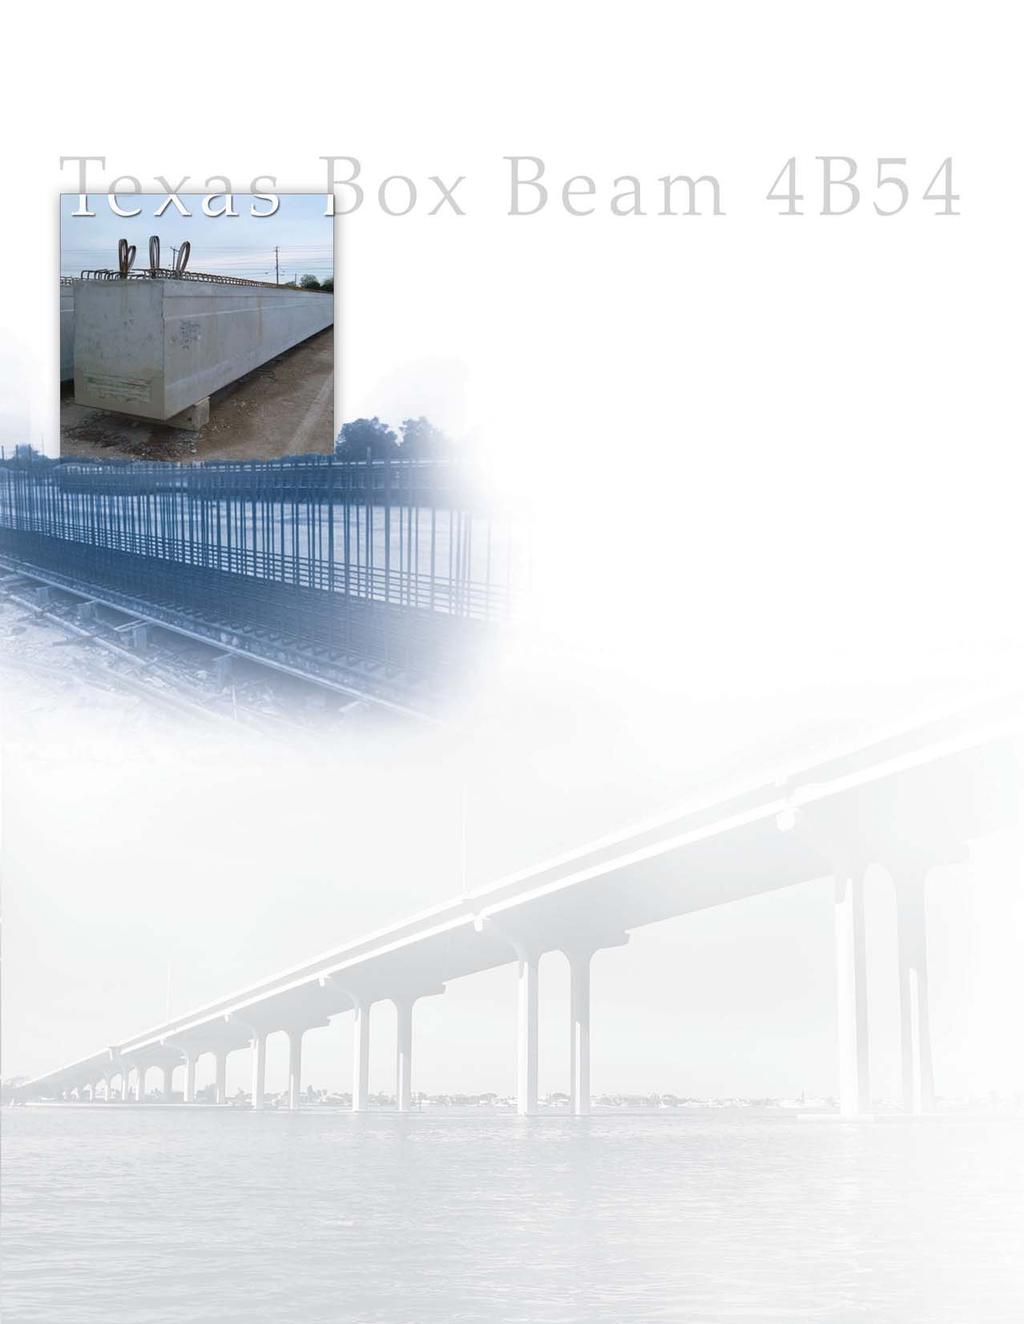 Texas Box Beam 4B54 Texas Box Beam 4B54 Precasters casting box beams like the one below successfully use WWR to accelerate the fabrication process and reduce total cost.